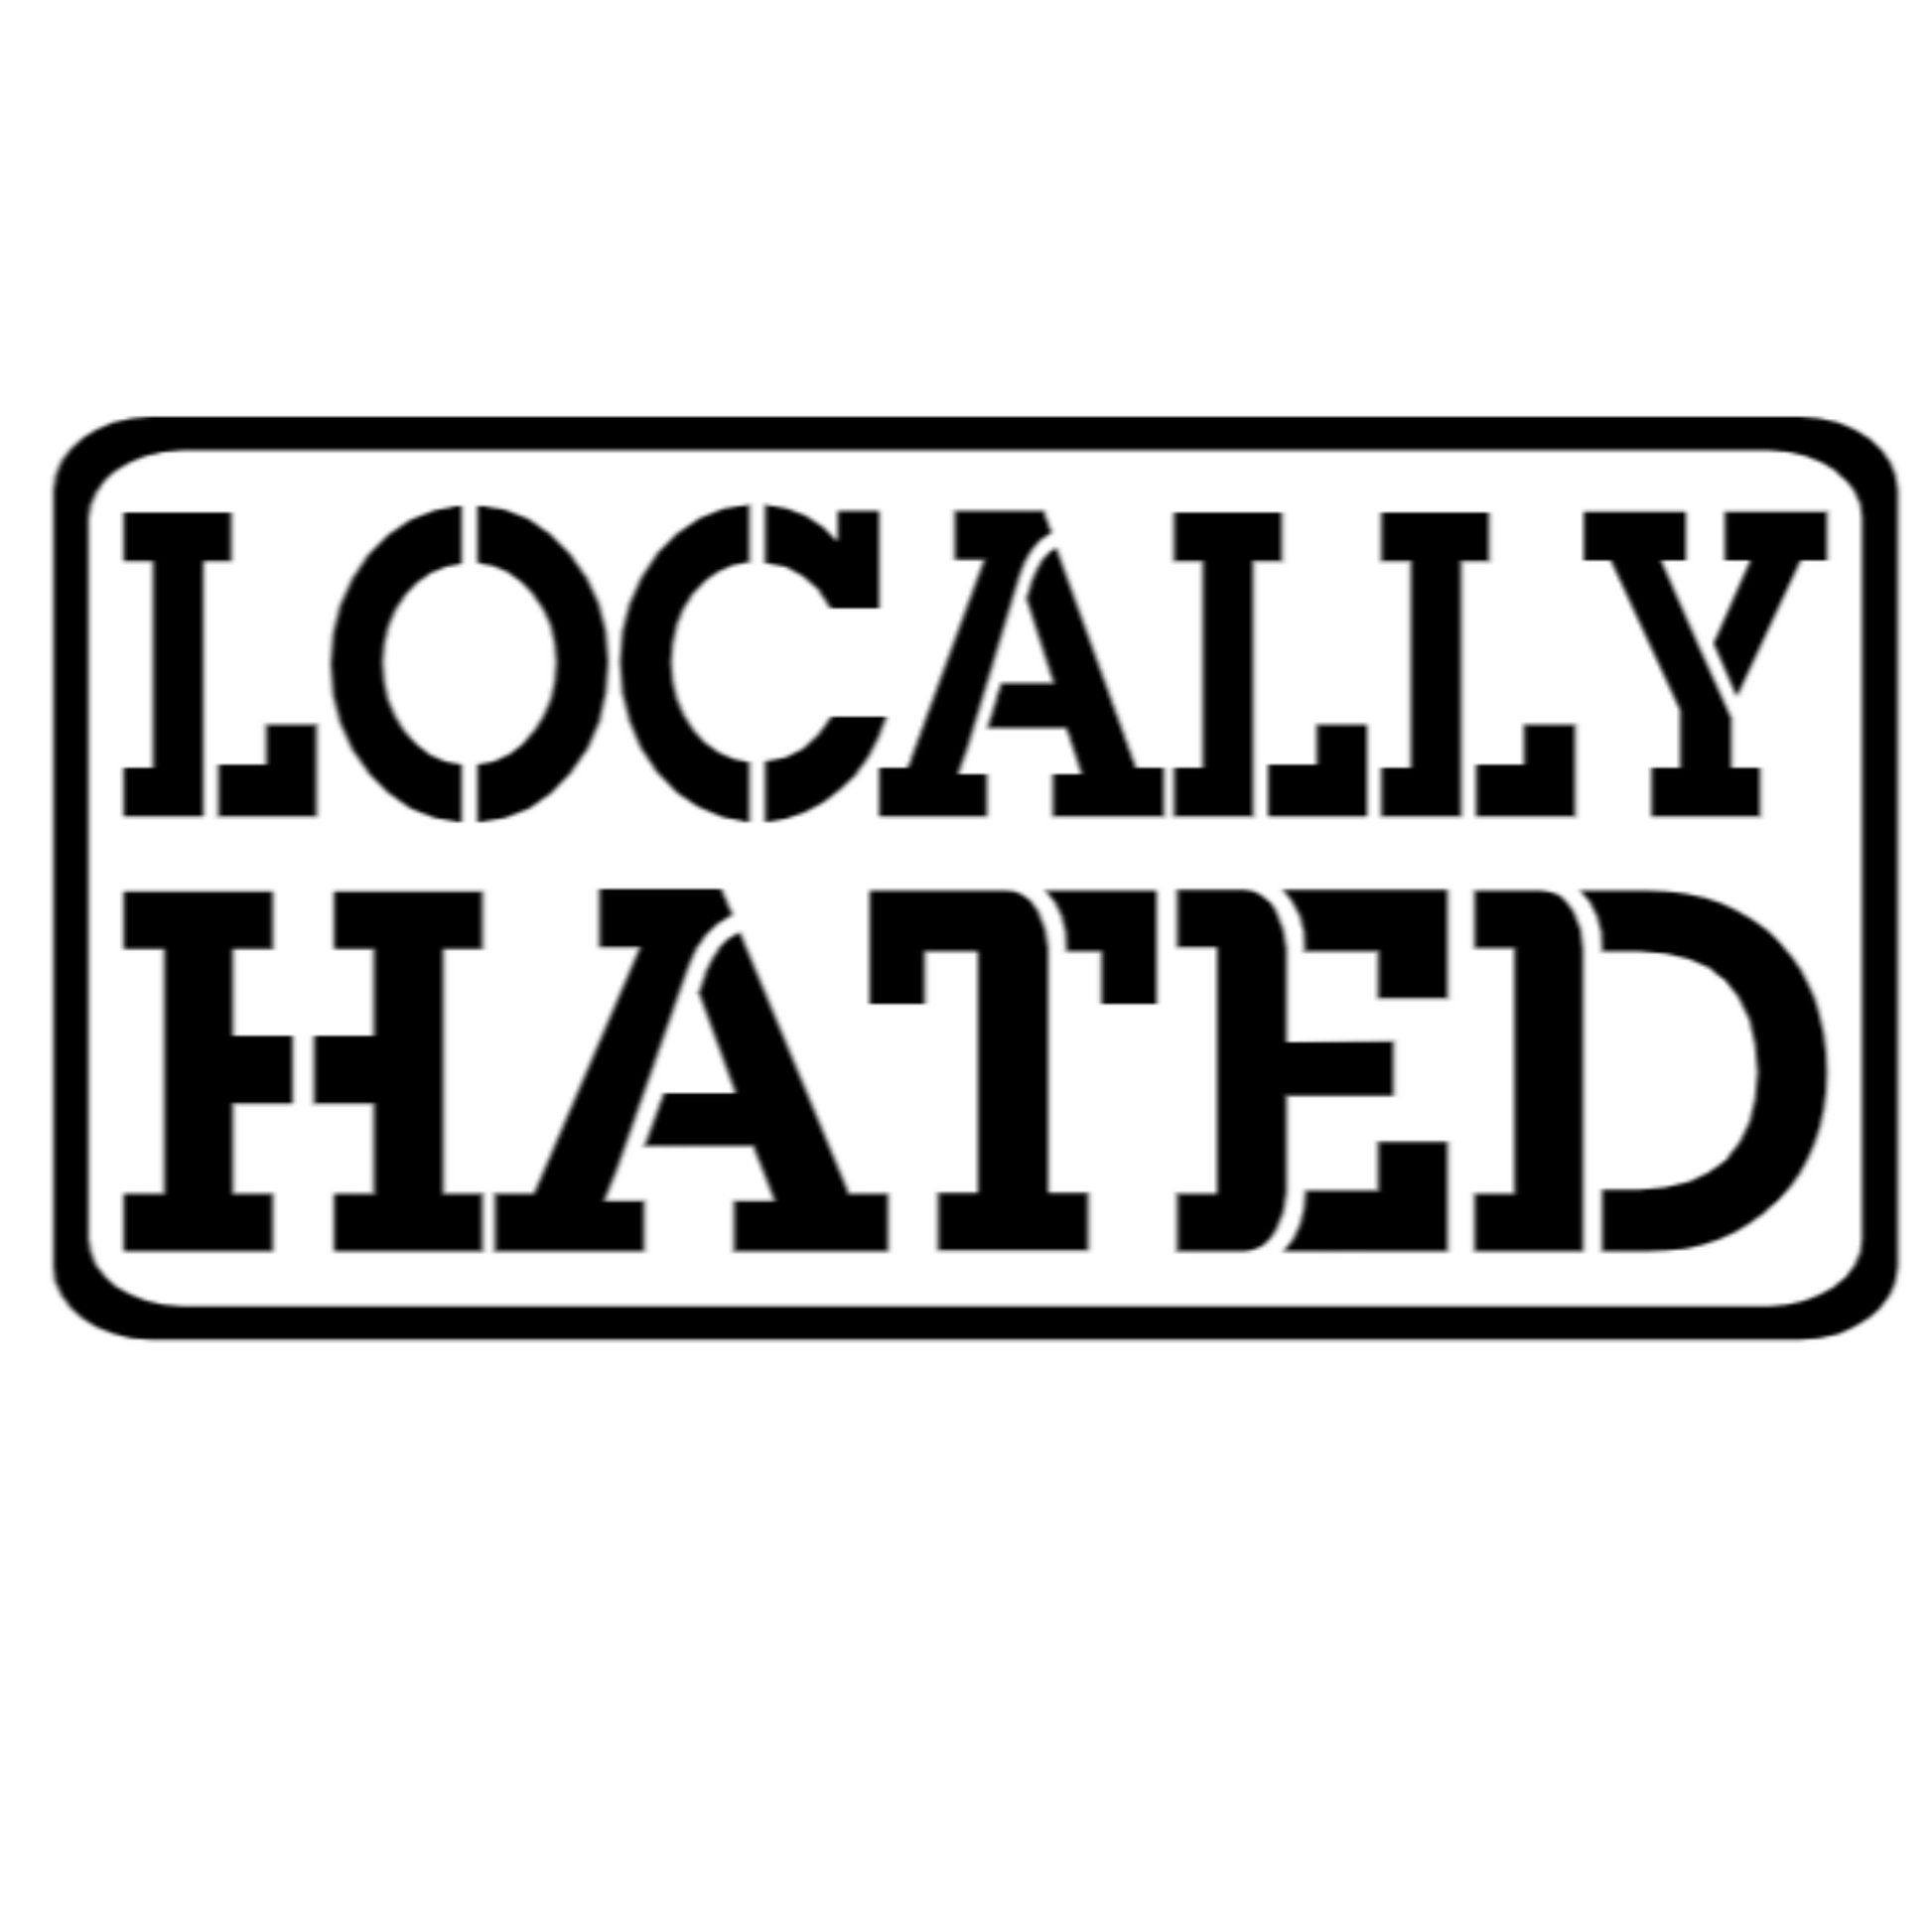 Locally Hated Decal Sticker